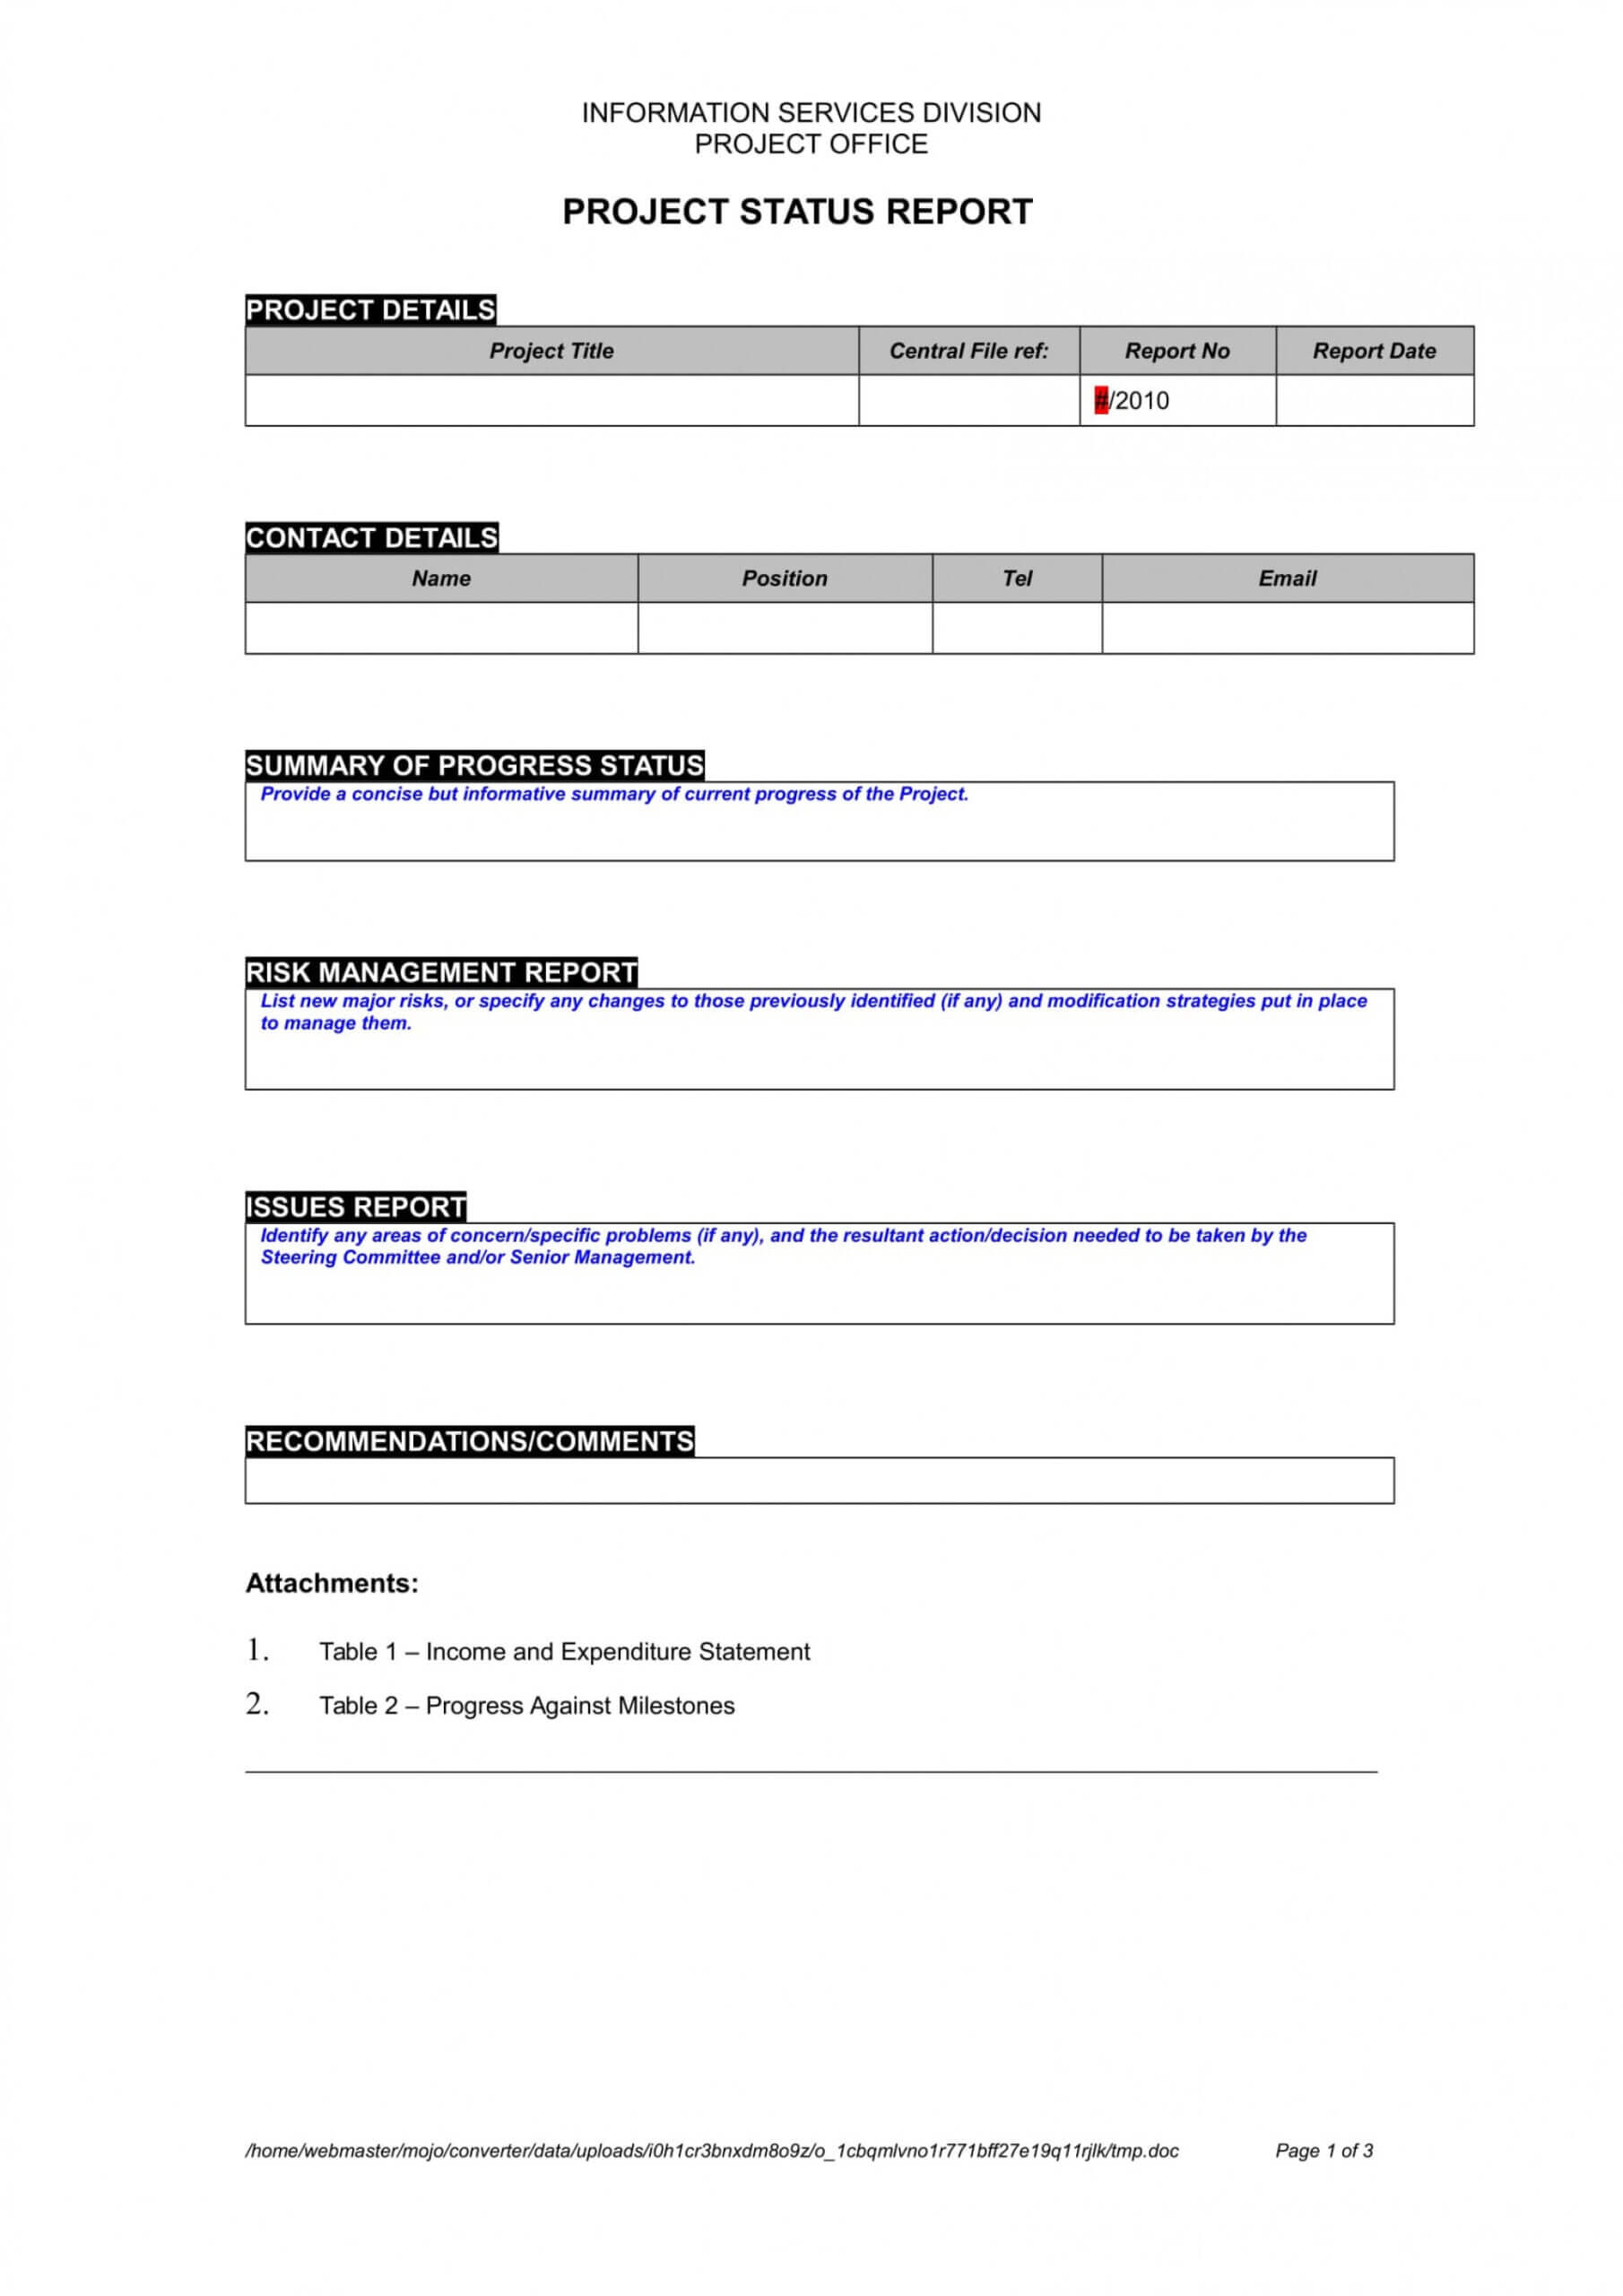 Project Status Report Template Word 2010 – Zohre Intended For Project Status Report Template Word 2010